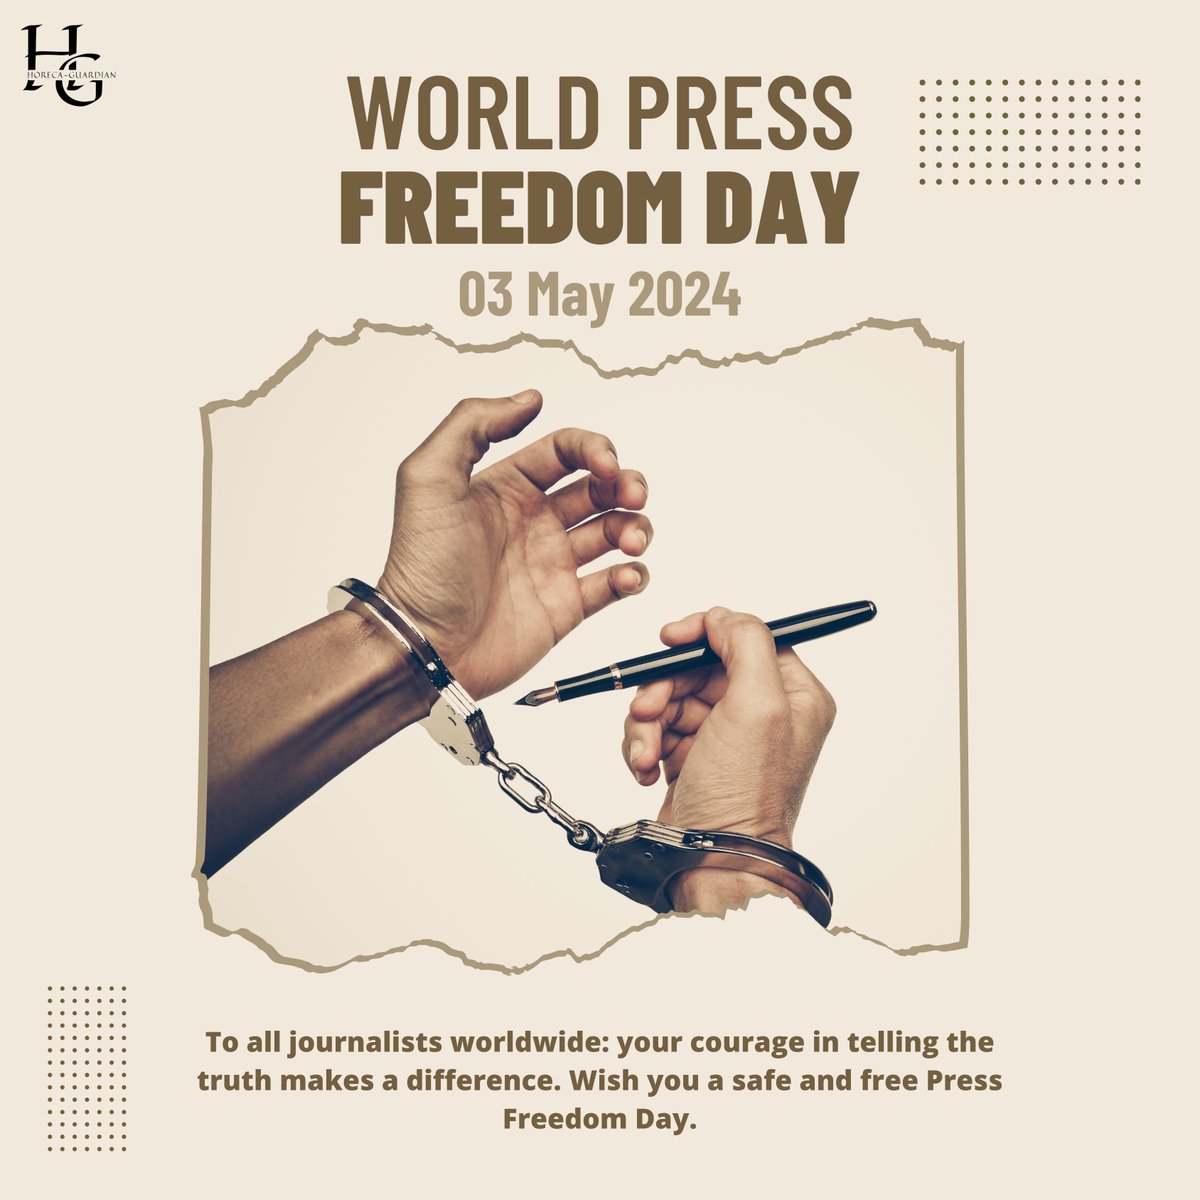 Empowering voices, defending truths. Happy World Press Freedom Day!
.
.
#FreePress #JournalismMatters #HotelSoftware #HotelTech #HospitalityManagement #HotelOperations #HotelLife #GuestExperience #HotelIndustry #InnovativeTech #DigitalTransformation #HotelSolutions #Hoteliers